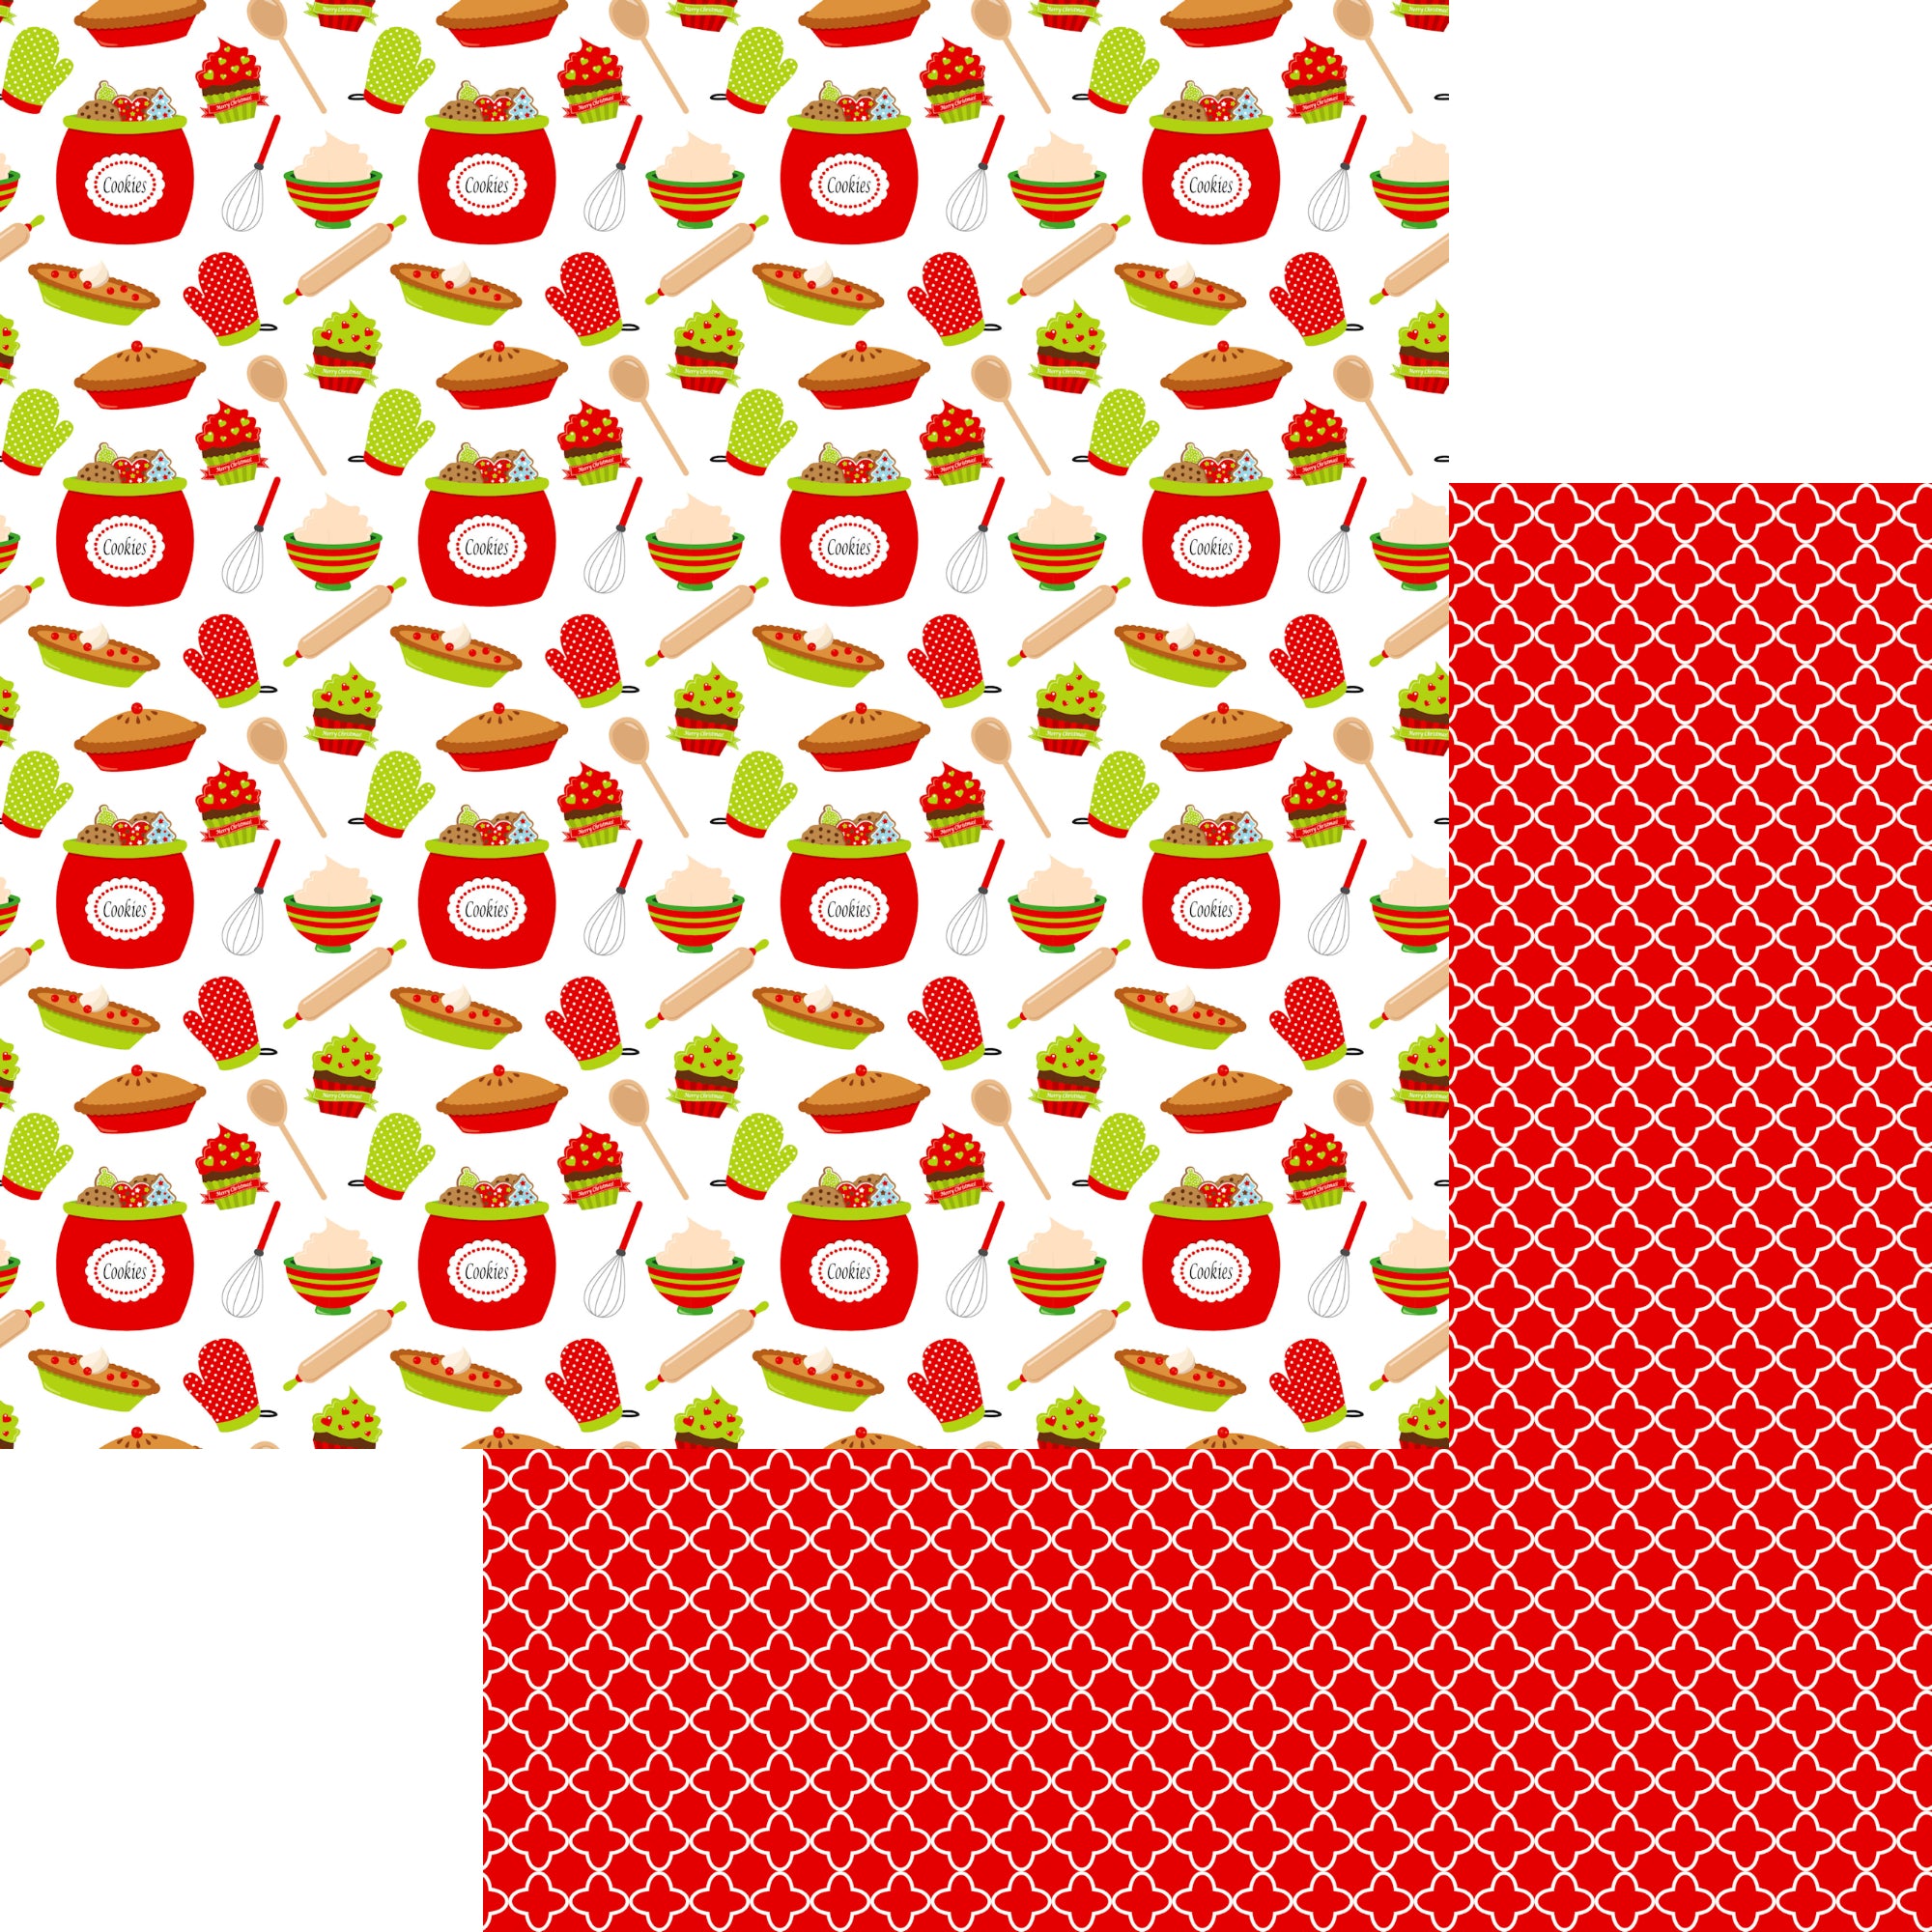 Christmas Baking Collection Santa's Cookie Jar 12 x 12 Double-Sided Scrapbook Paper by SSC Designs